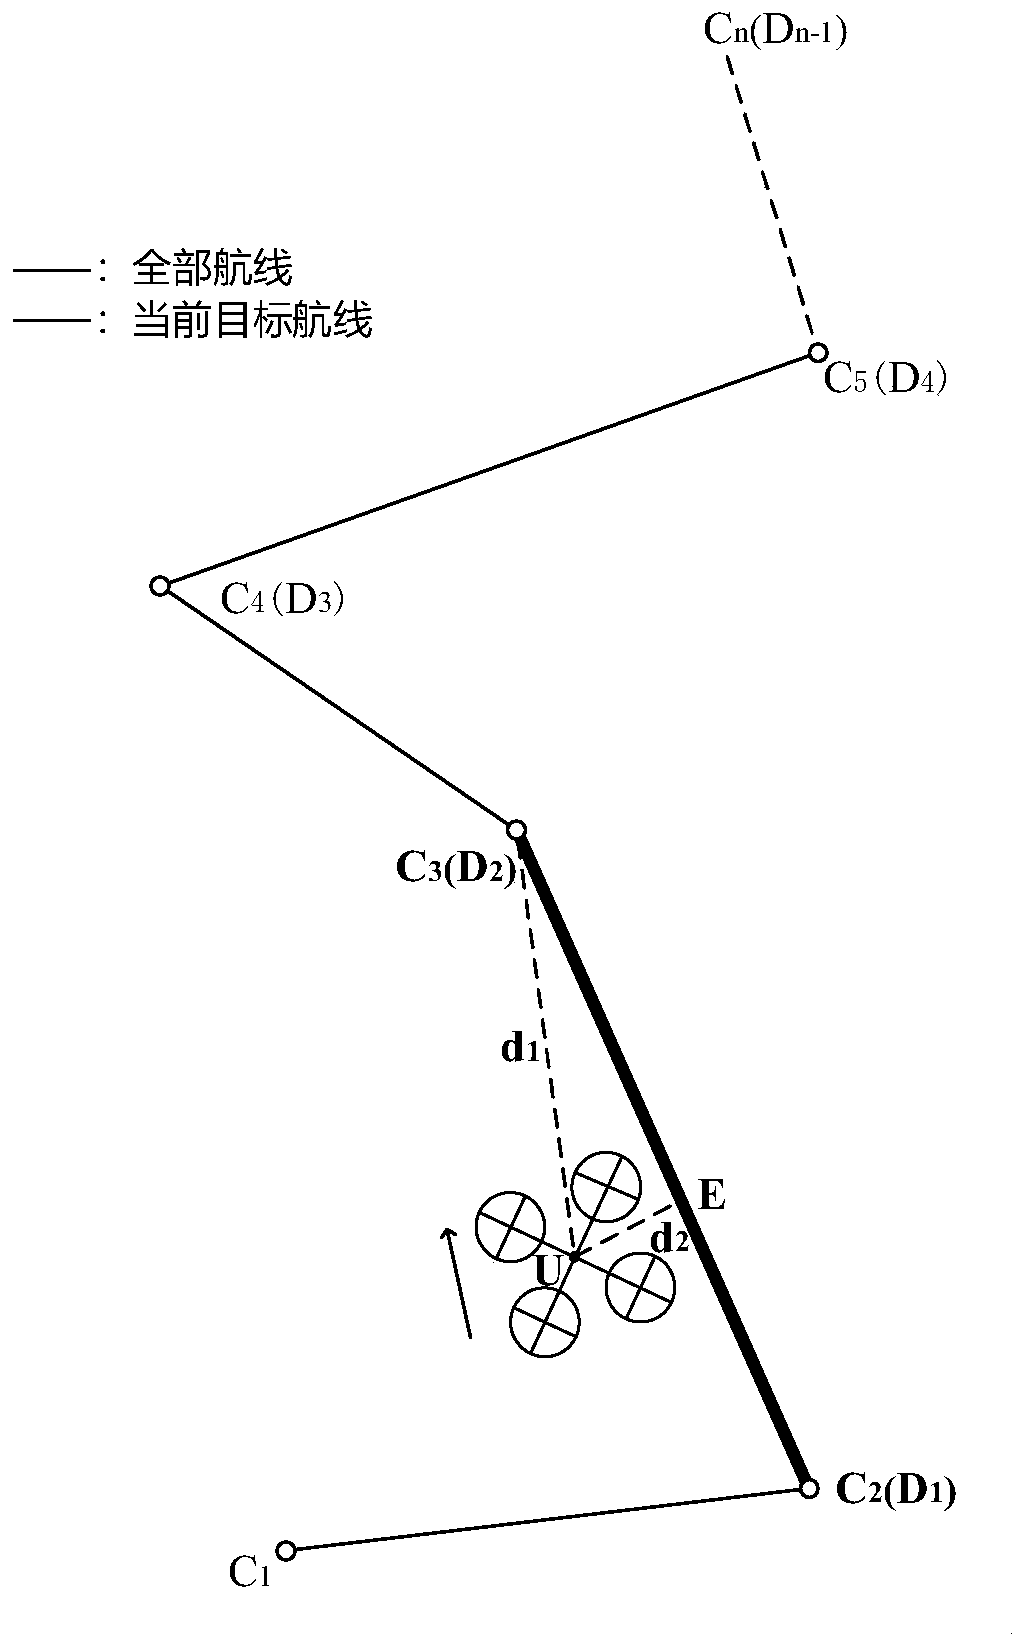 Four-rotor unmanned aerial vehicle route following control method based on deep reinforcement learning